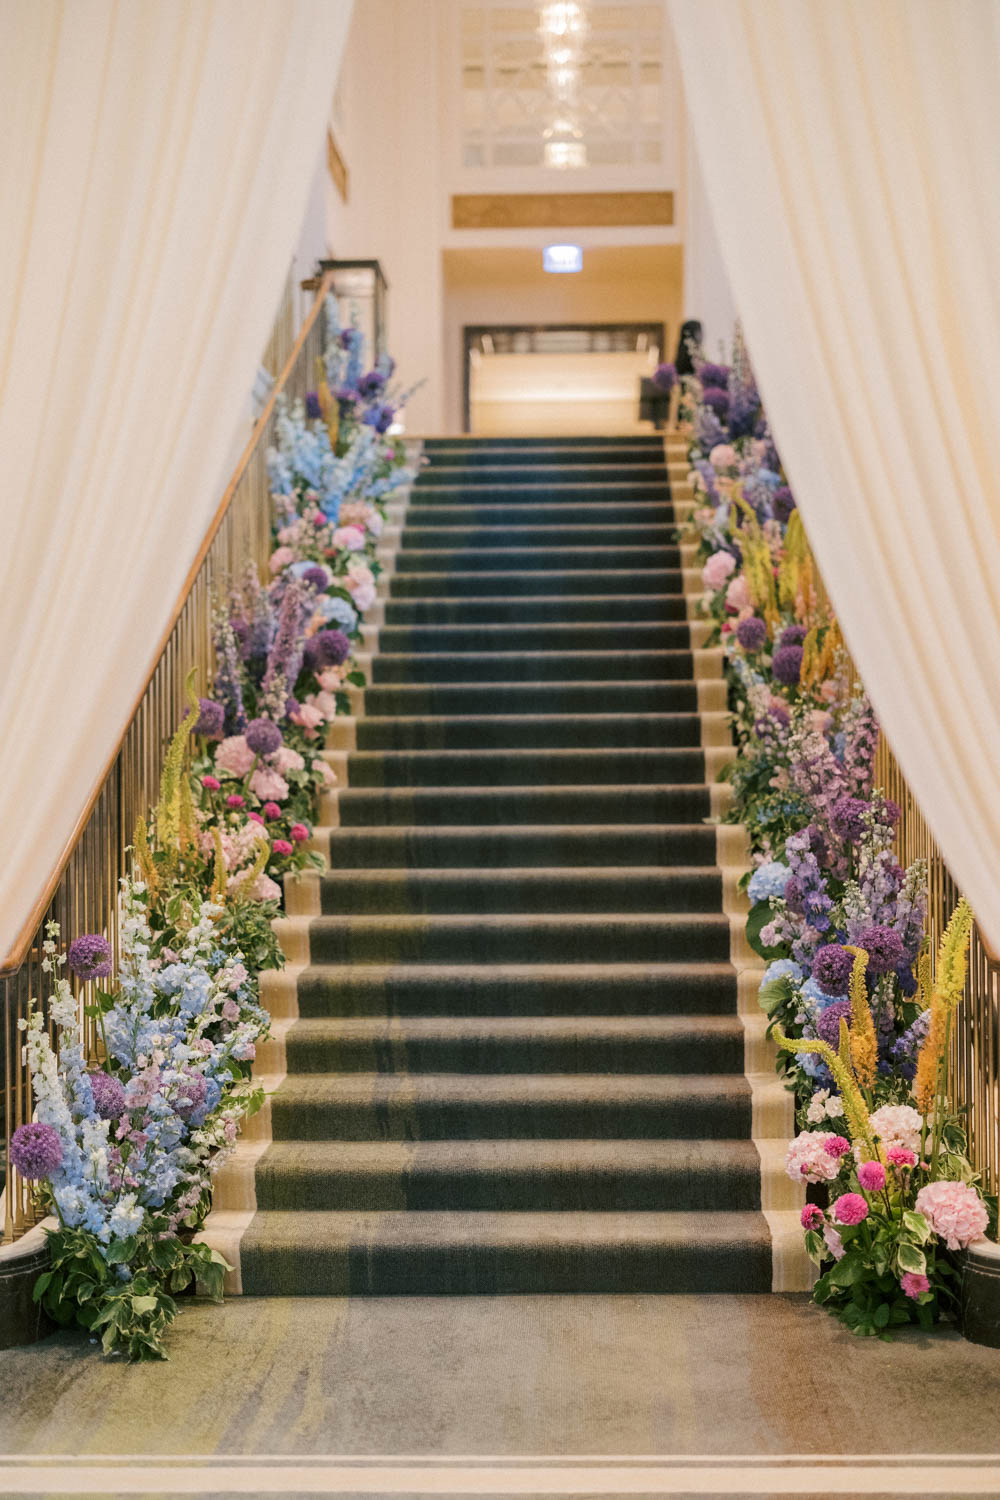 The Peninsula Chicago staircase lined with colorful floral arrangements.